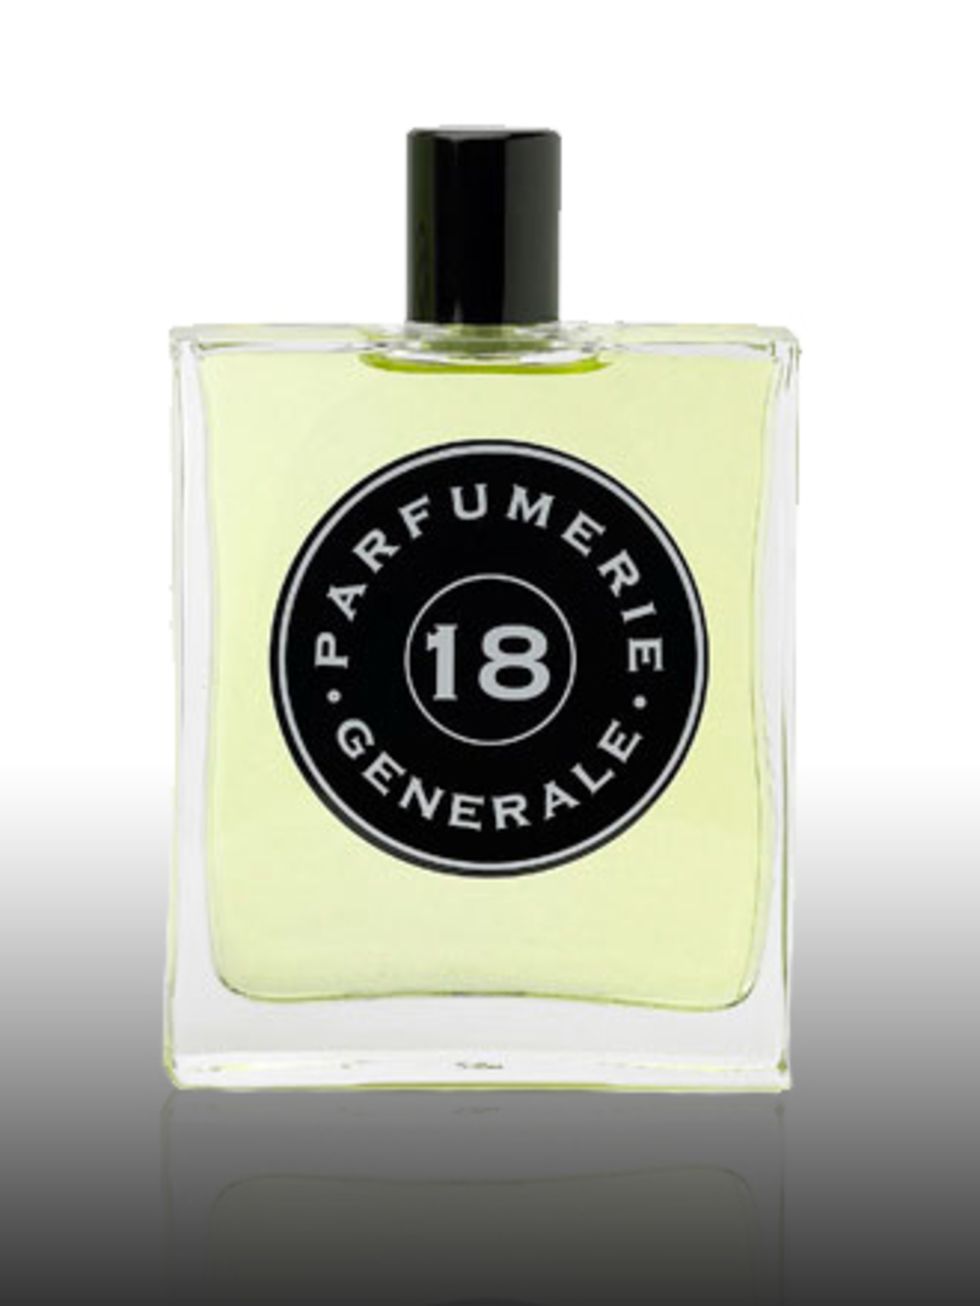 <p>Cadjmere 18, £63.50 by Parfumerie Generale at <a href="http://www.lessenteurs.com/">Les Senteurs</a> </p><p>Founded by Creative Perfumer Pierre Guillaume in 2002, French brand Parfumerie Generale (the name echoes his initials) fuses the world of perfum